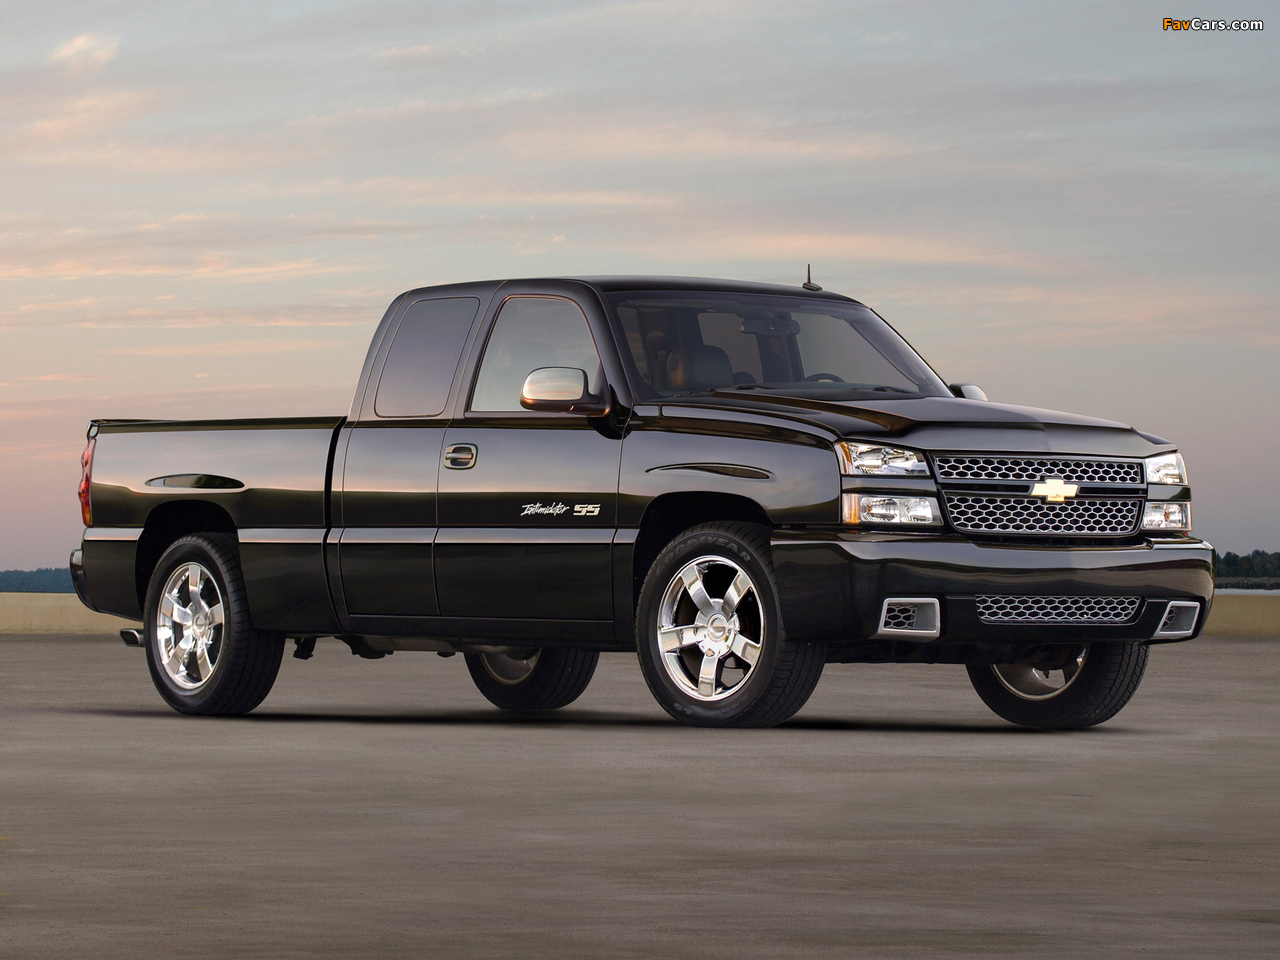 Chevrolet Silverado SS Intimidator Limited Edition 2006 pictures (1280 x 960)